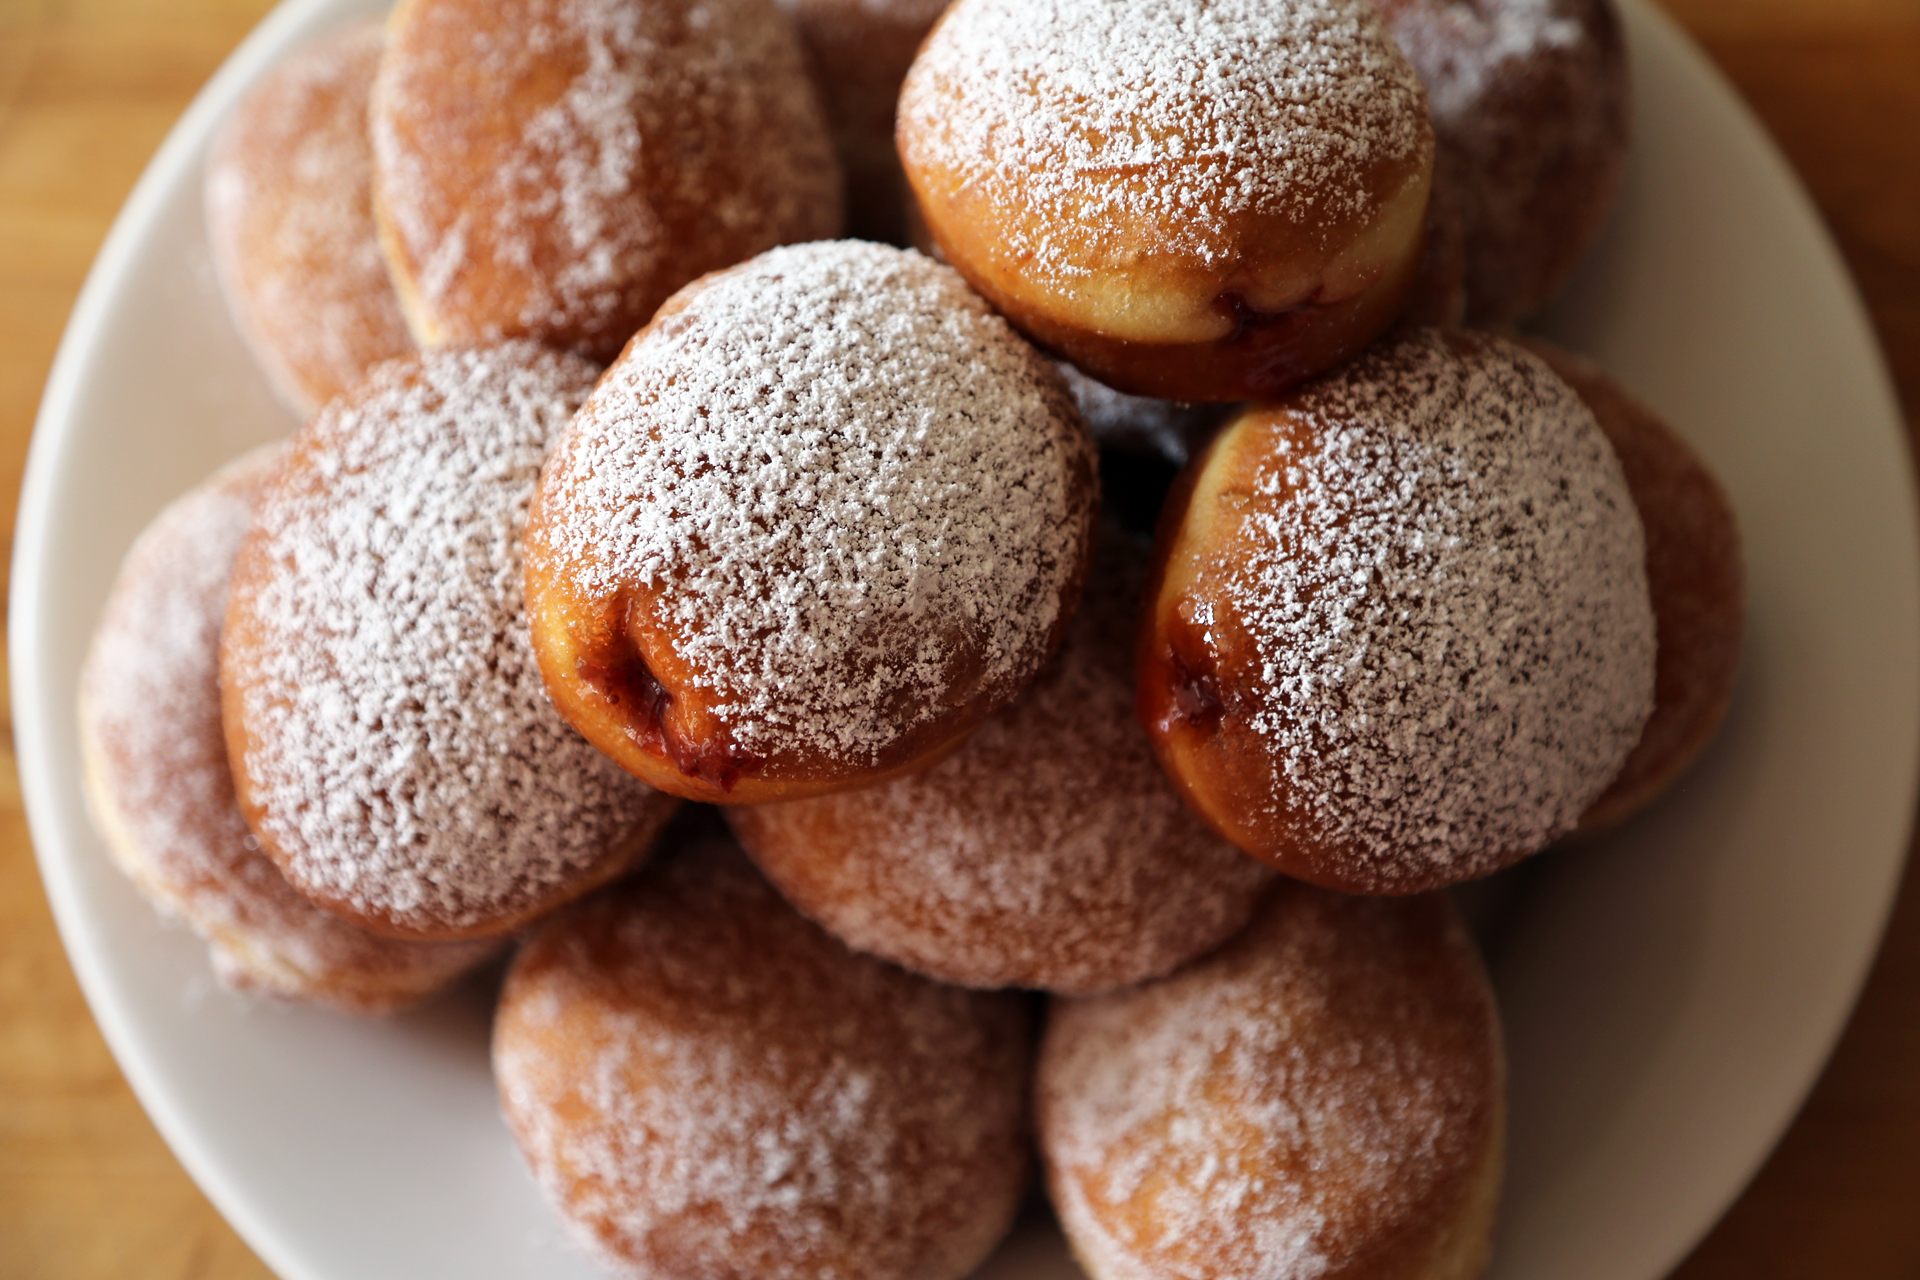 Strawberry Jam-Filled Jelly Donuts (Sufganiyot)